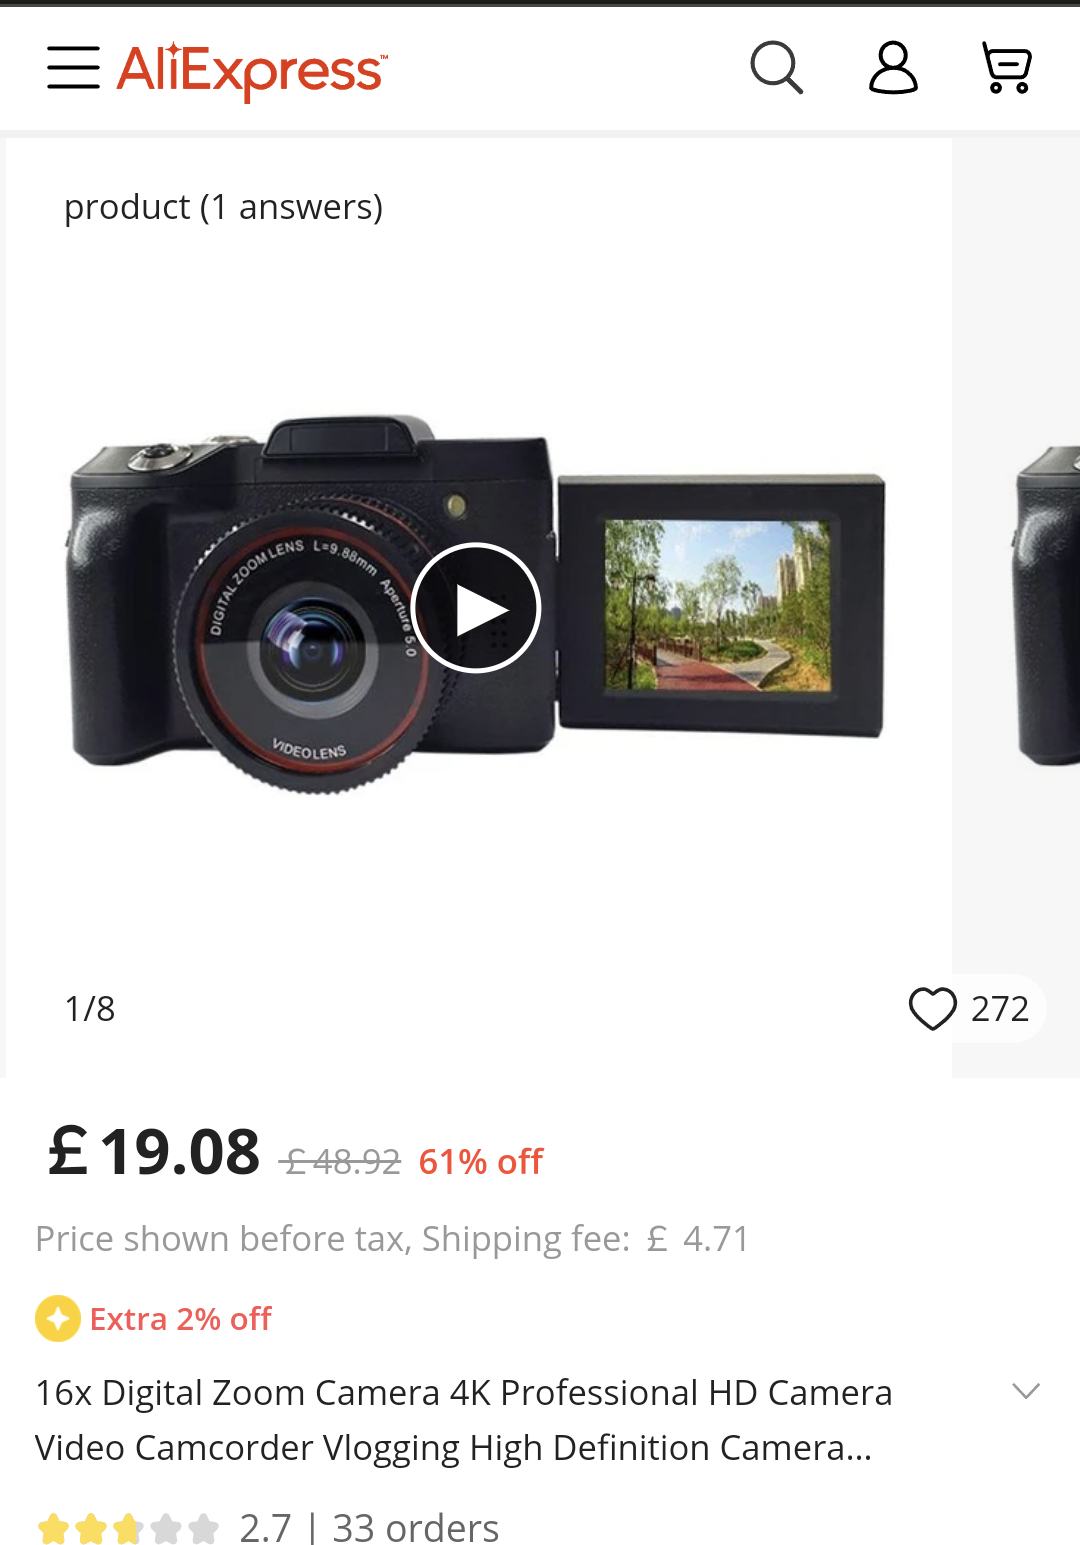 The Camera as advertised on AliExpress.